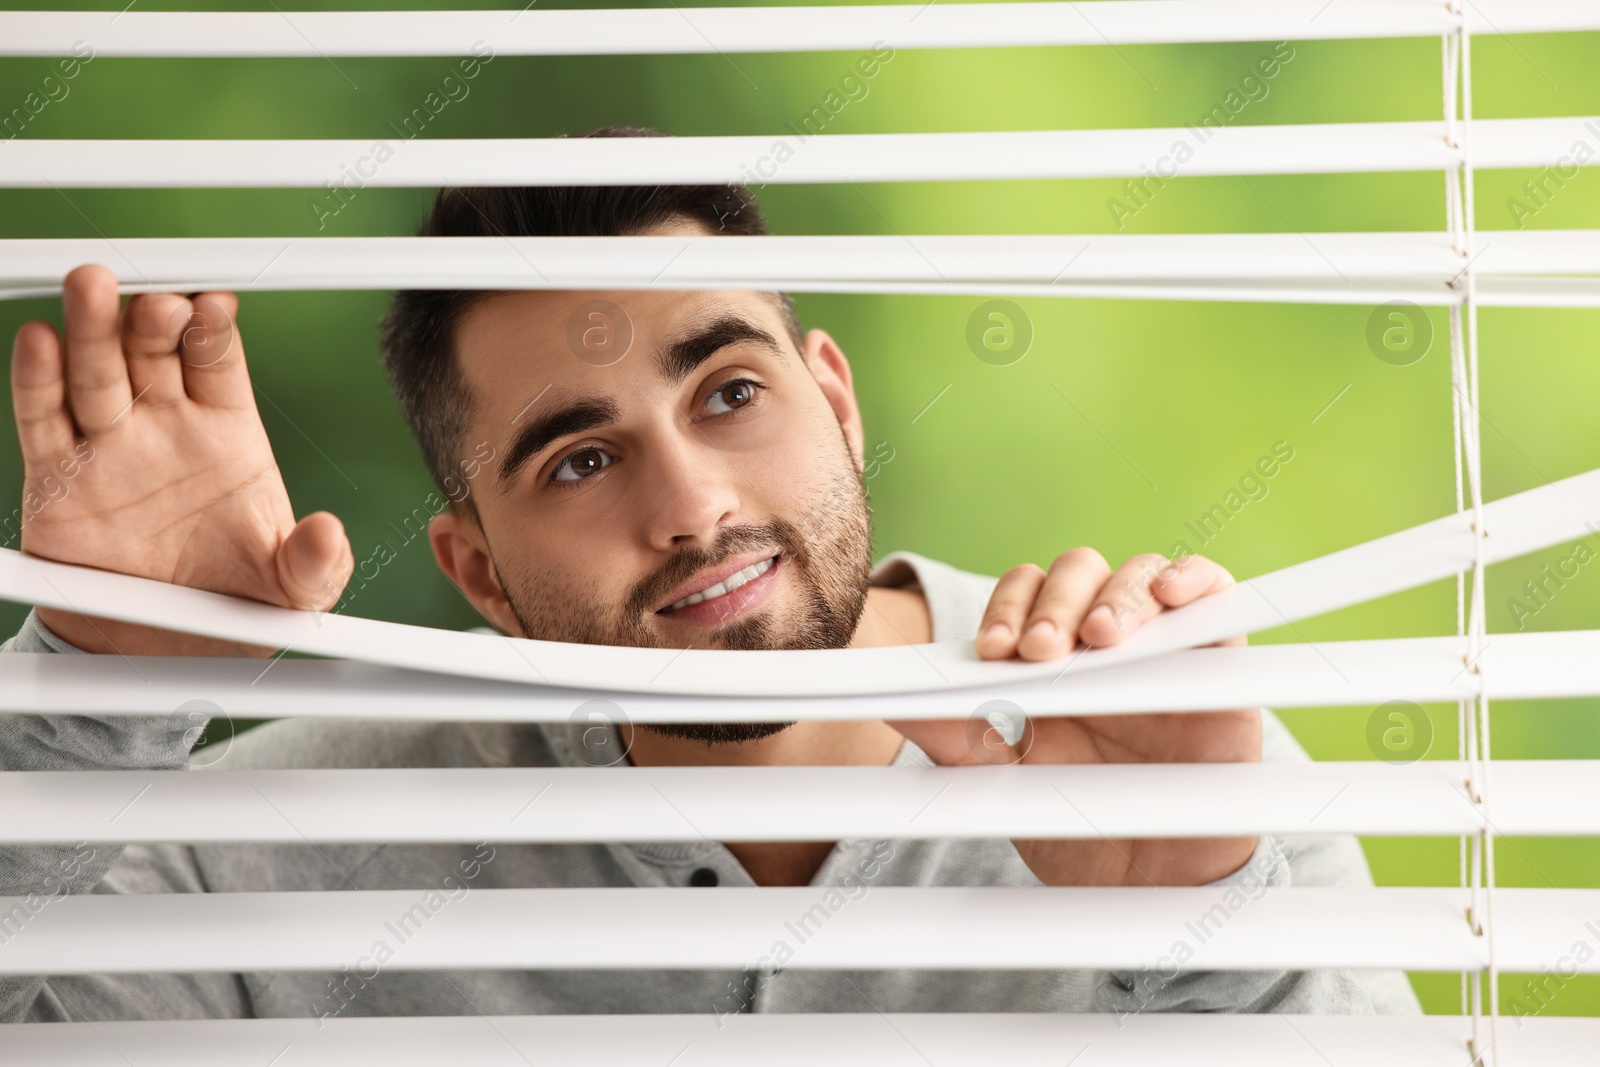 Photo of Young man looking through window blinds on blurred background